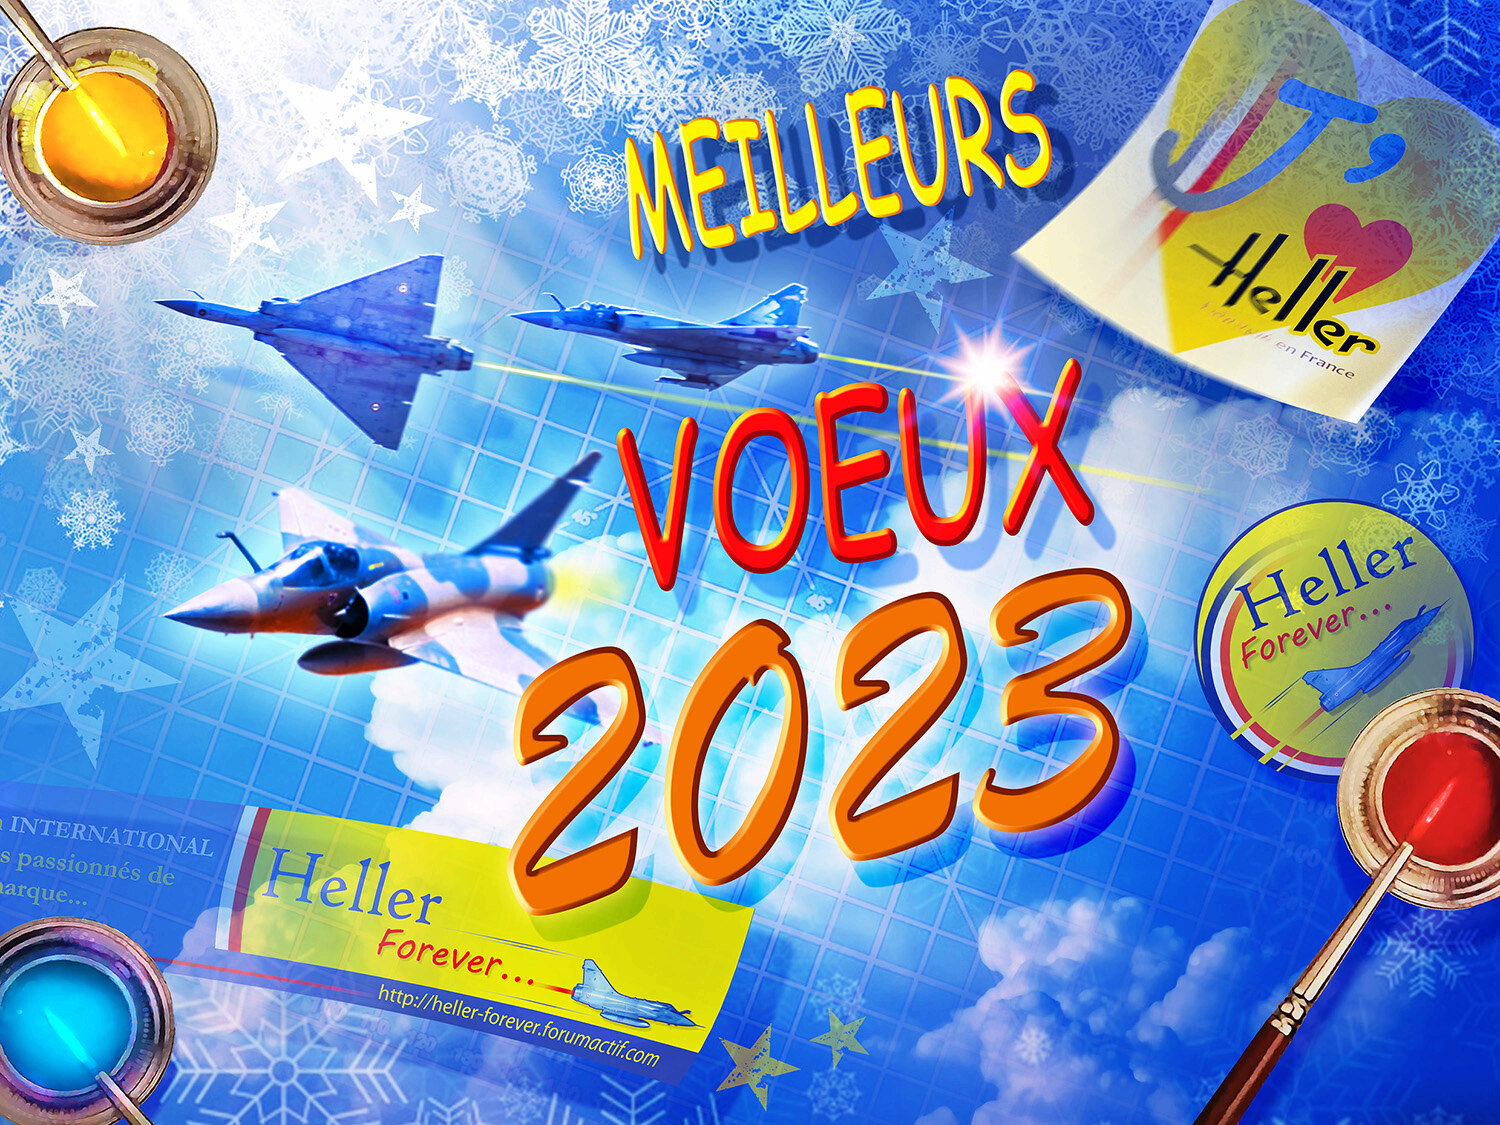 EXCLUSIF Heller-ForEver- une partie des news 2020 Heller .... - Page 12 Grappe13